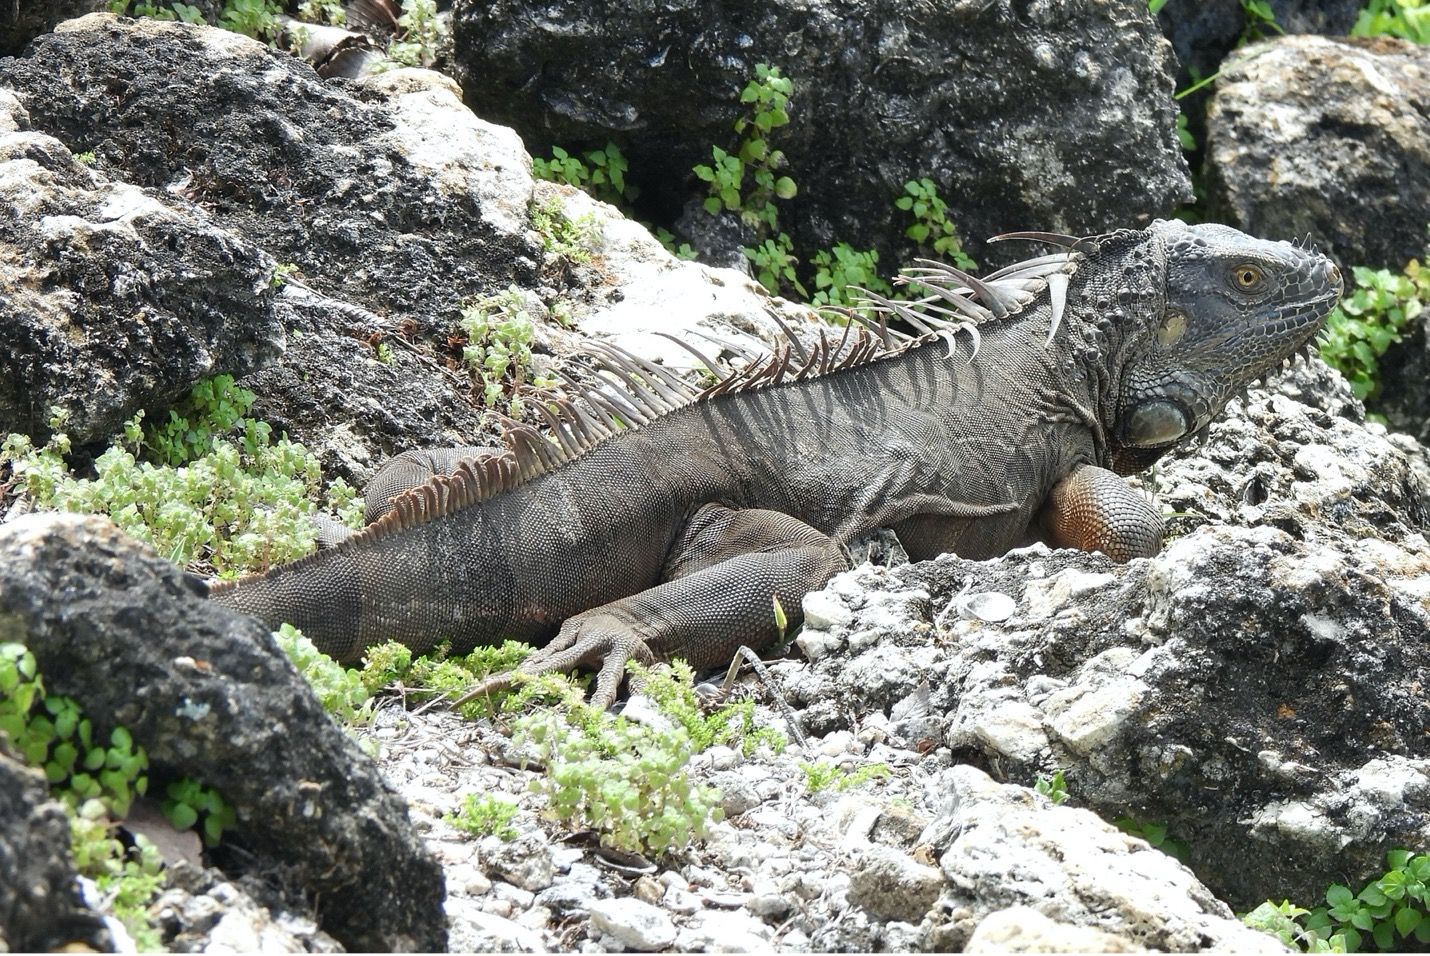 It’s not uncommon to see an adult green iguana (Iguana iguana) that is not green, such as this brownish-gray adult. No matter their color, adult green iguanas always have a prominent row of spike-like scales on their back. 